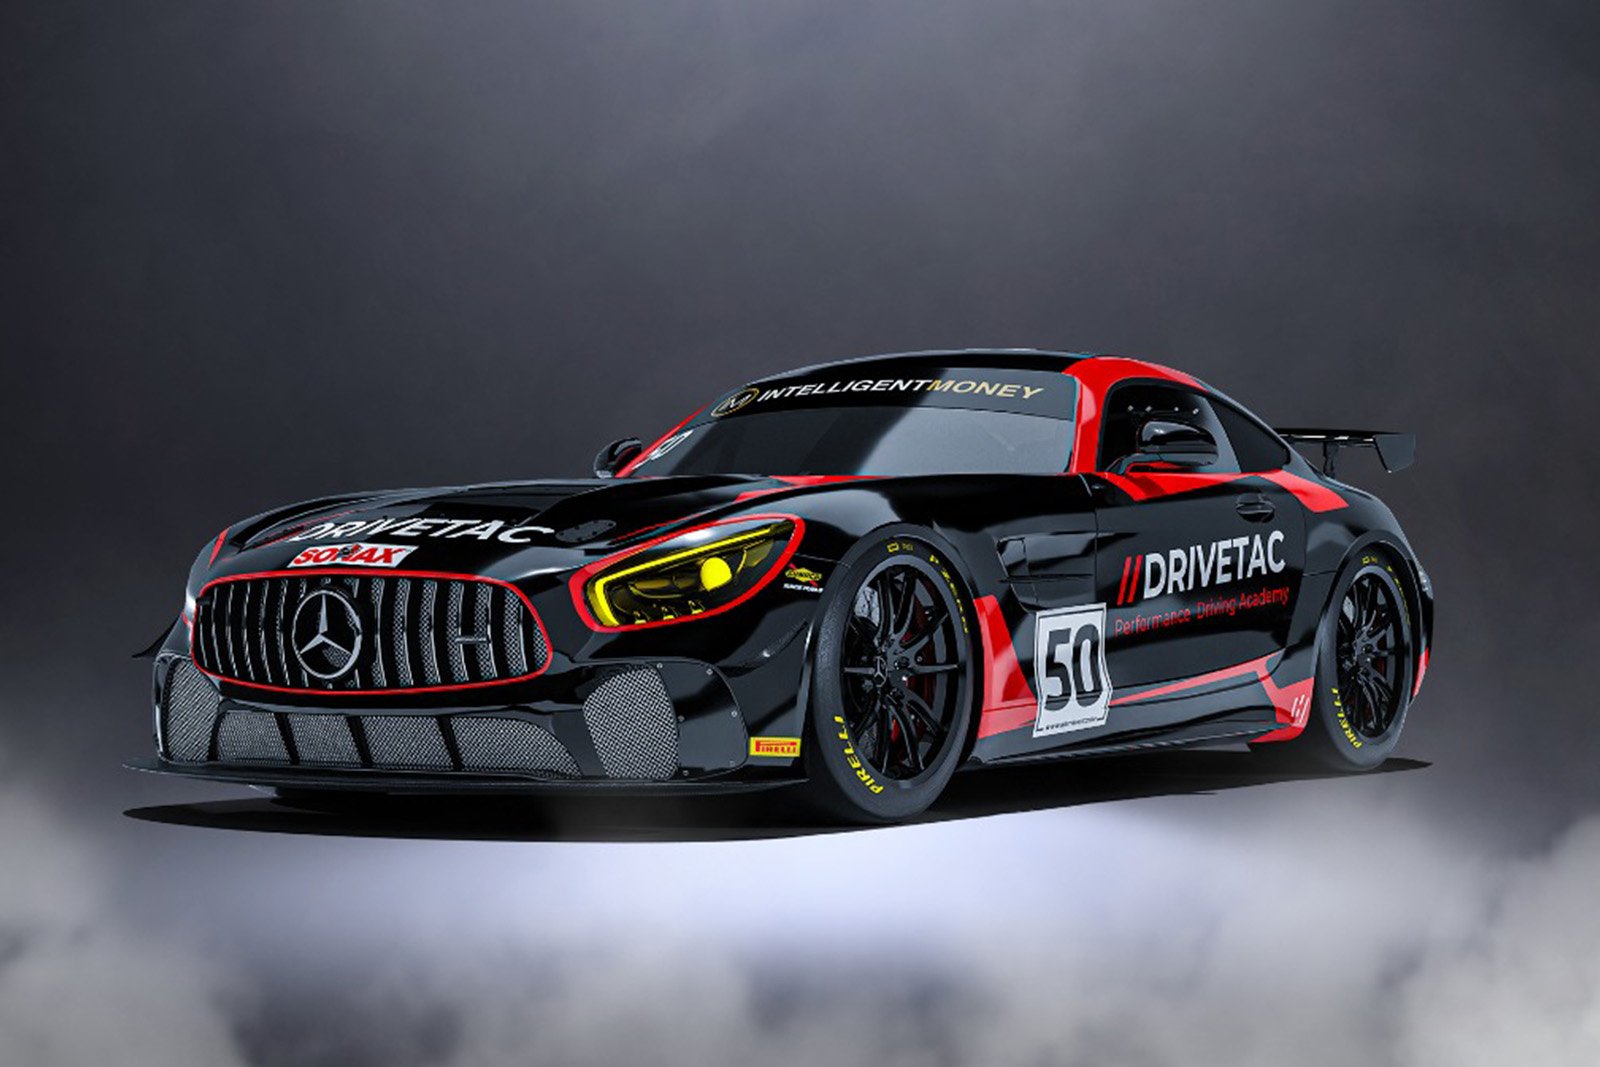 The Track Focused and Drivetac Mercedes-AMG which will contest the British GT Championship this year.